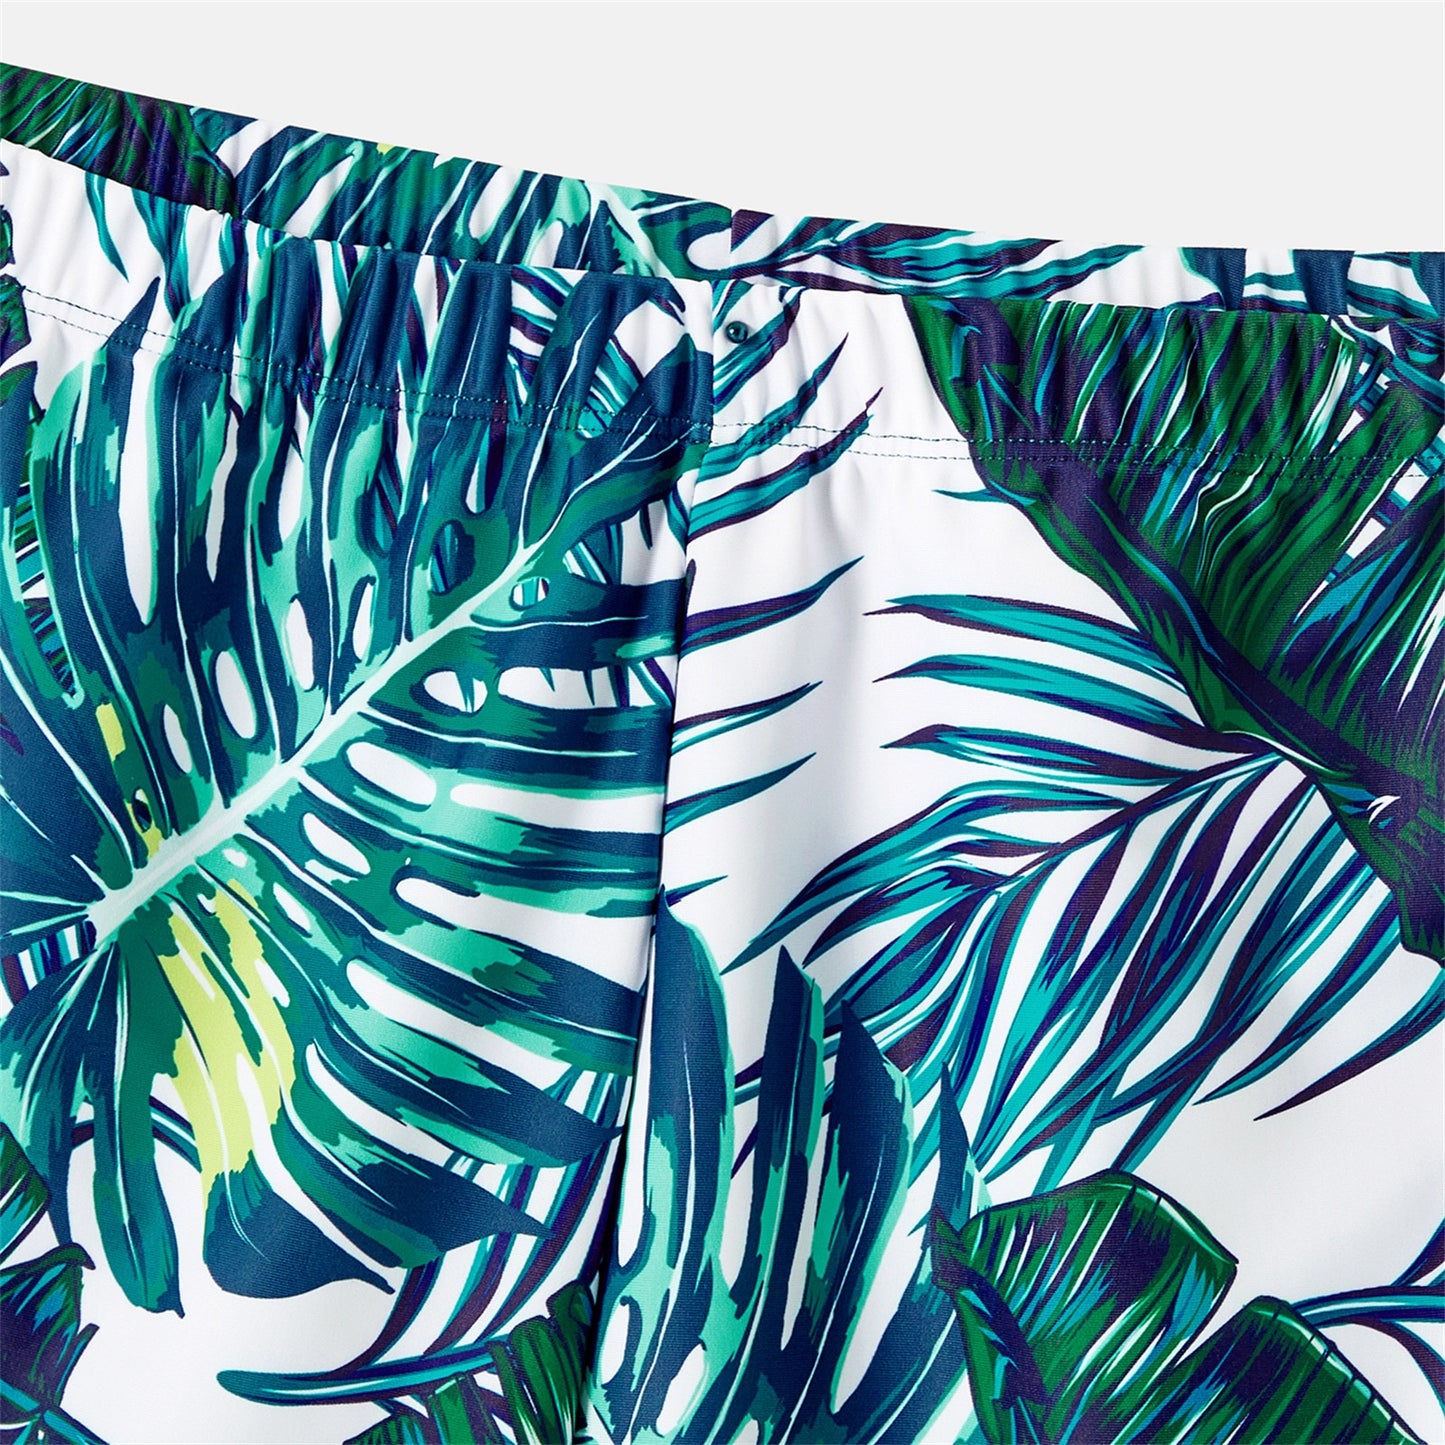 Family Matching! Palm Leaf One Piece Swimsuits & Trunks